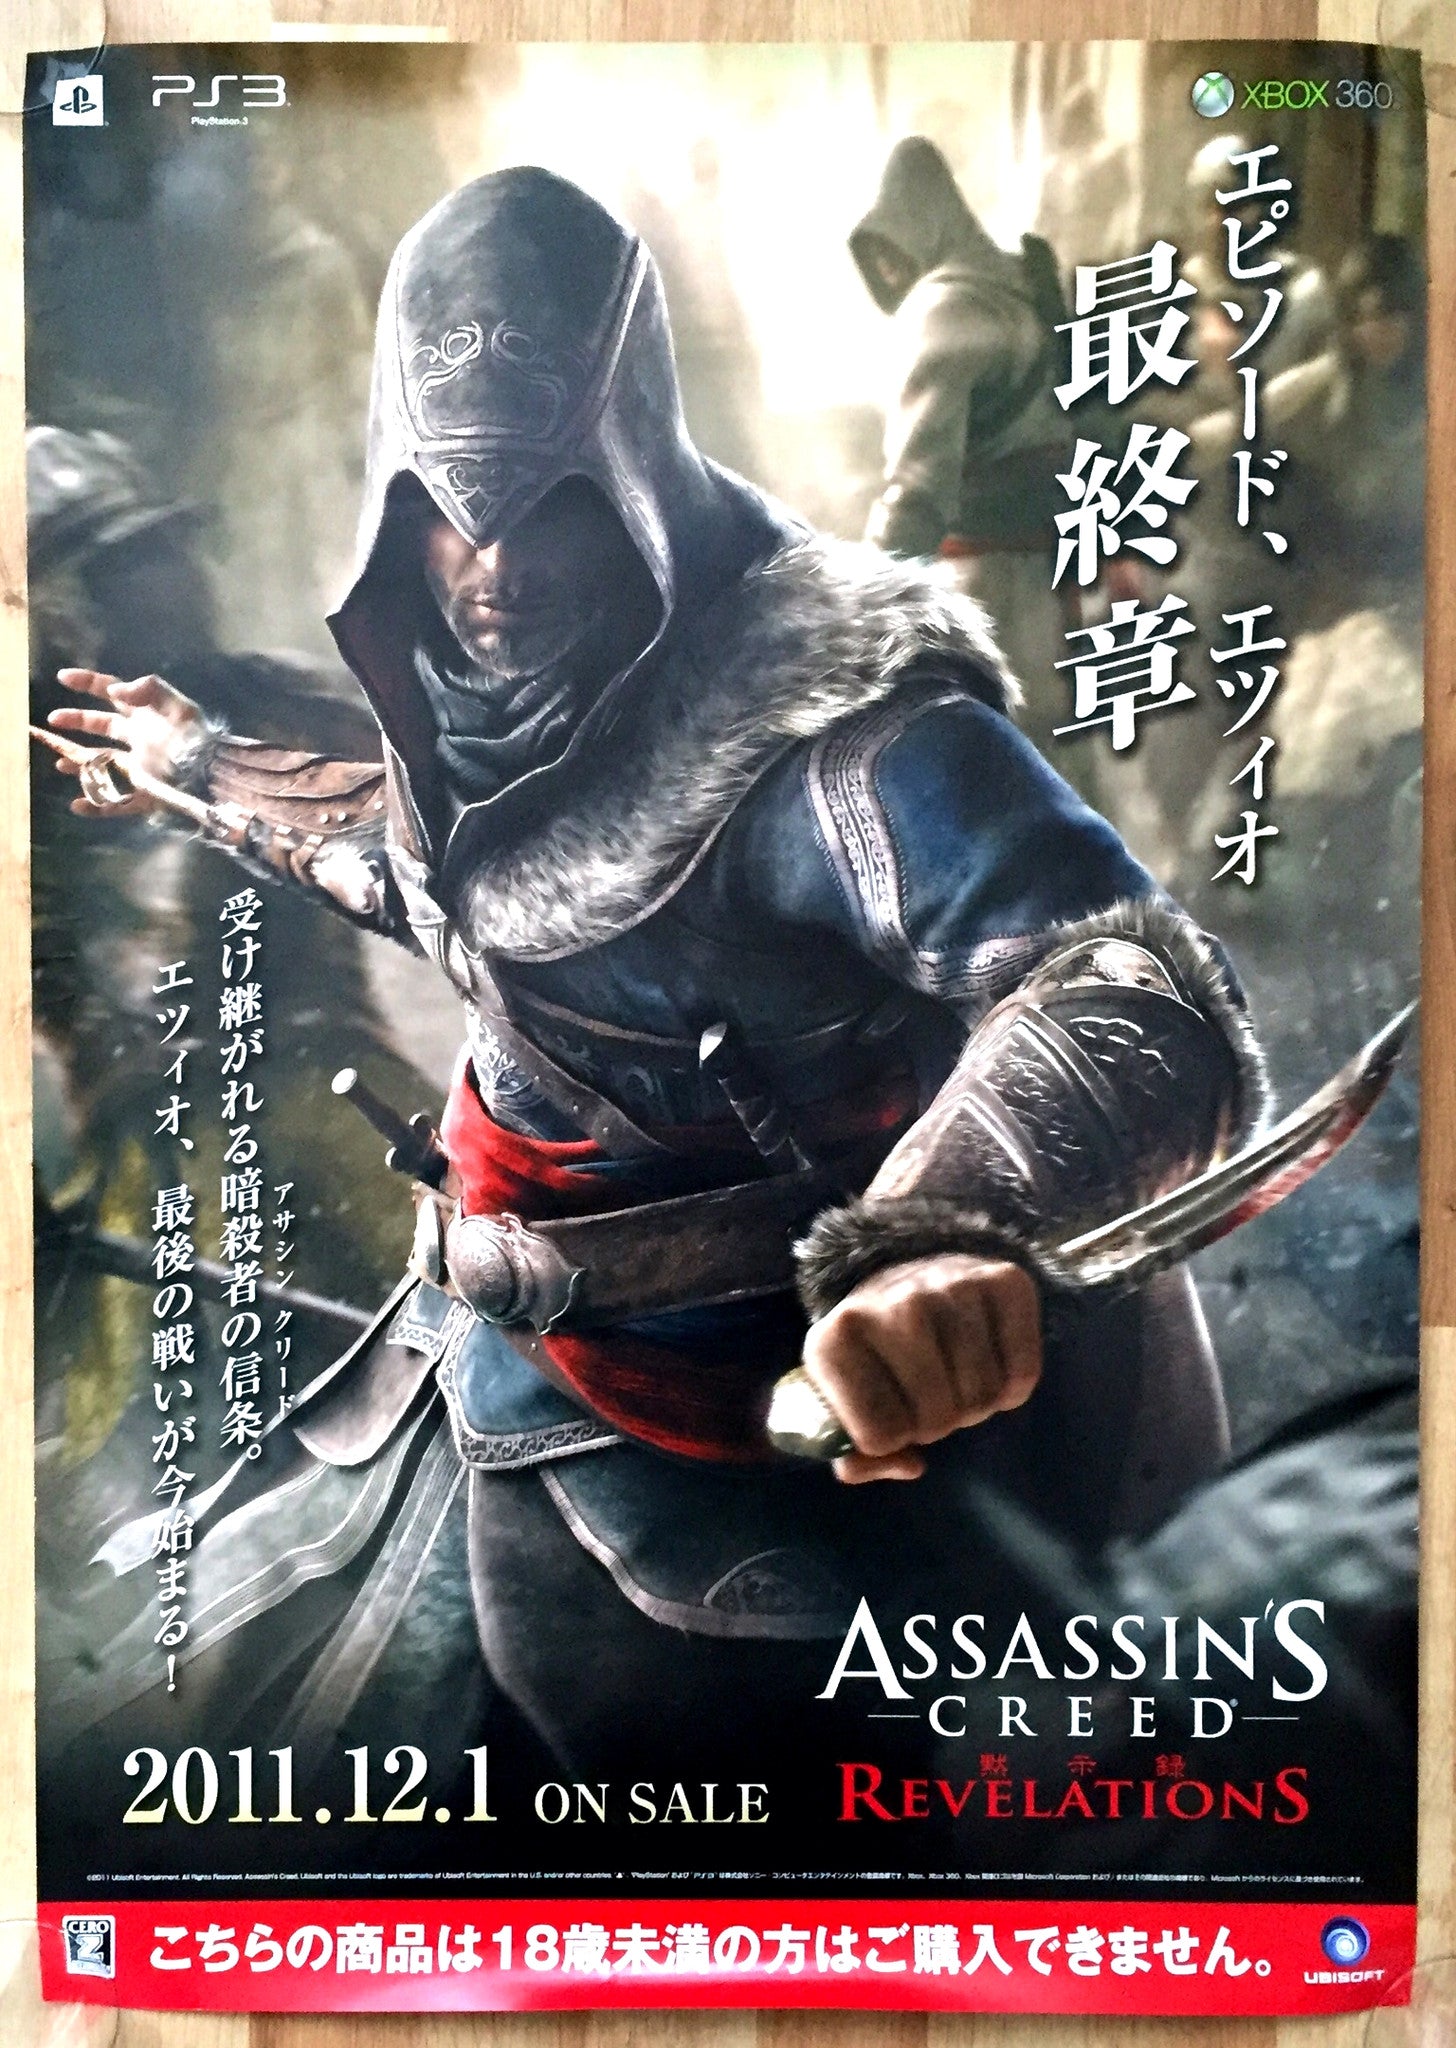 Assassin's Creed: Revelations (B2) Japanese Promotional Poster